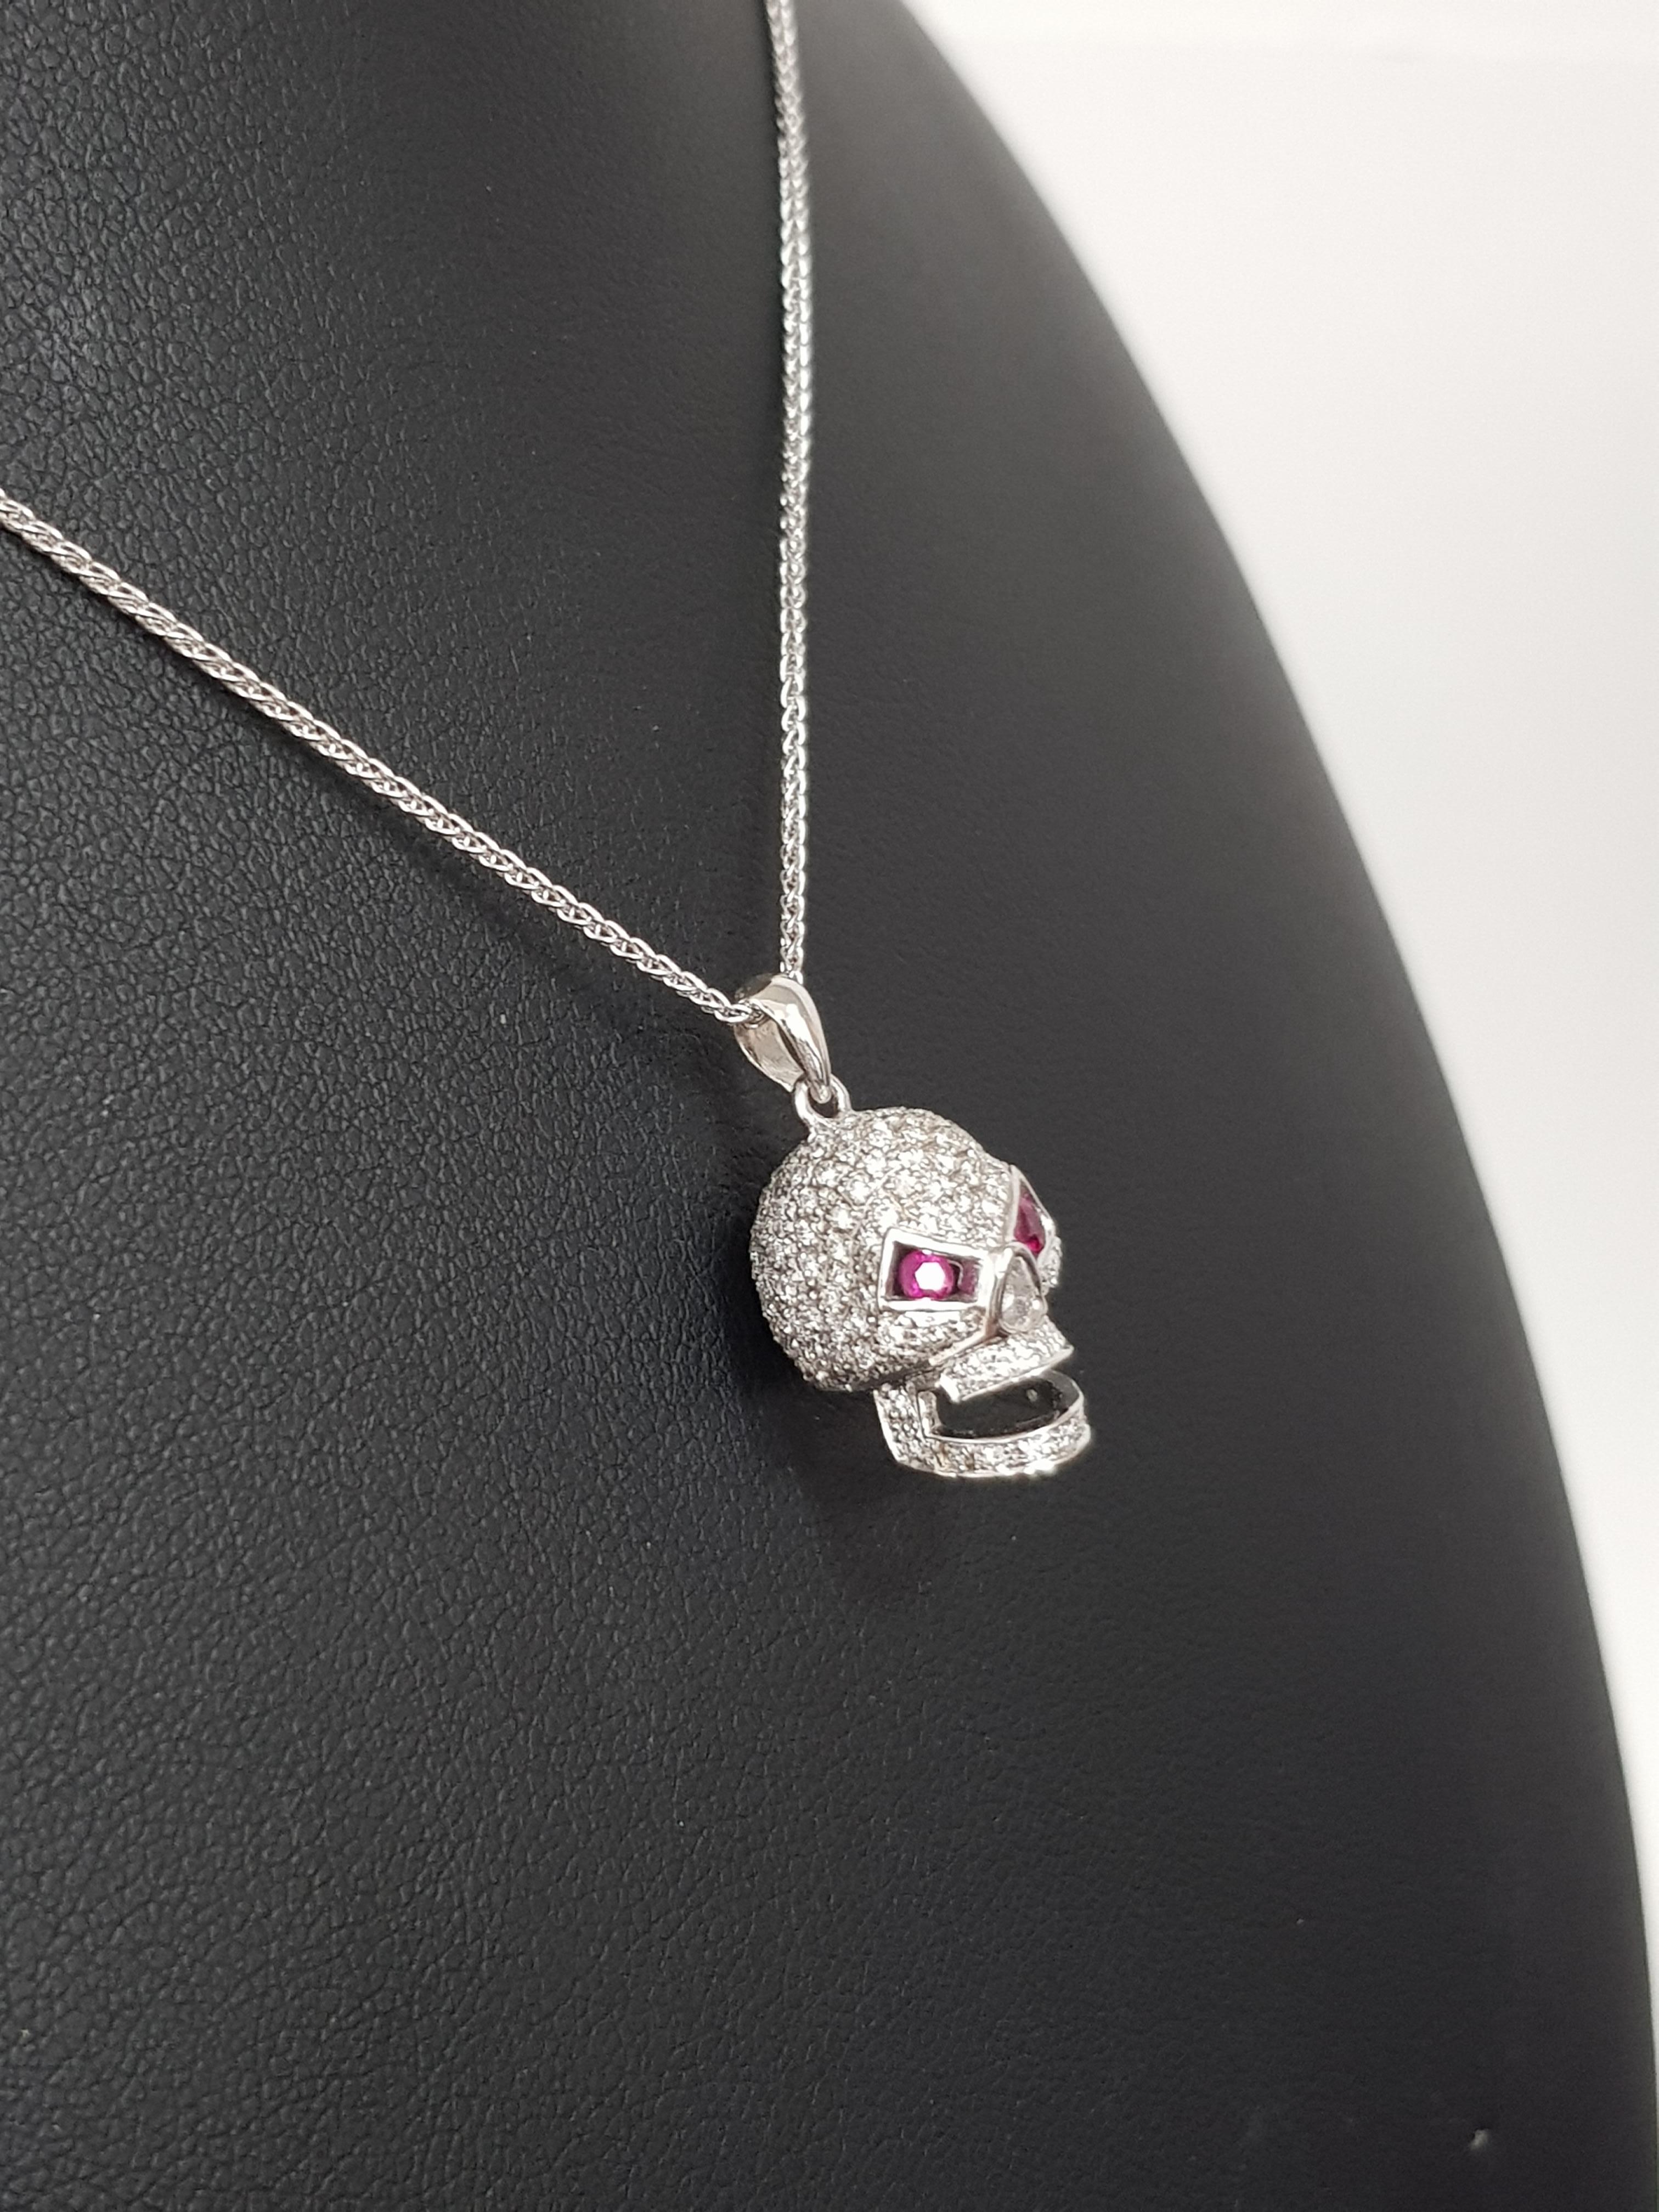 The contemporary and bespoke Skull pendant has a total of 1.00 Carat of White Round Diamonds colour G/H clarity VS/SI1. A totally unique addition to your jewellery collection. The skull face is crafted with the finest detail to give an outstanding